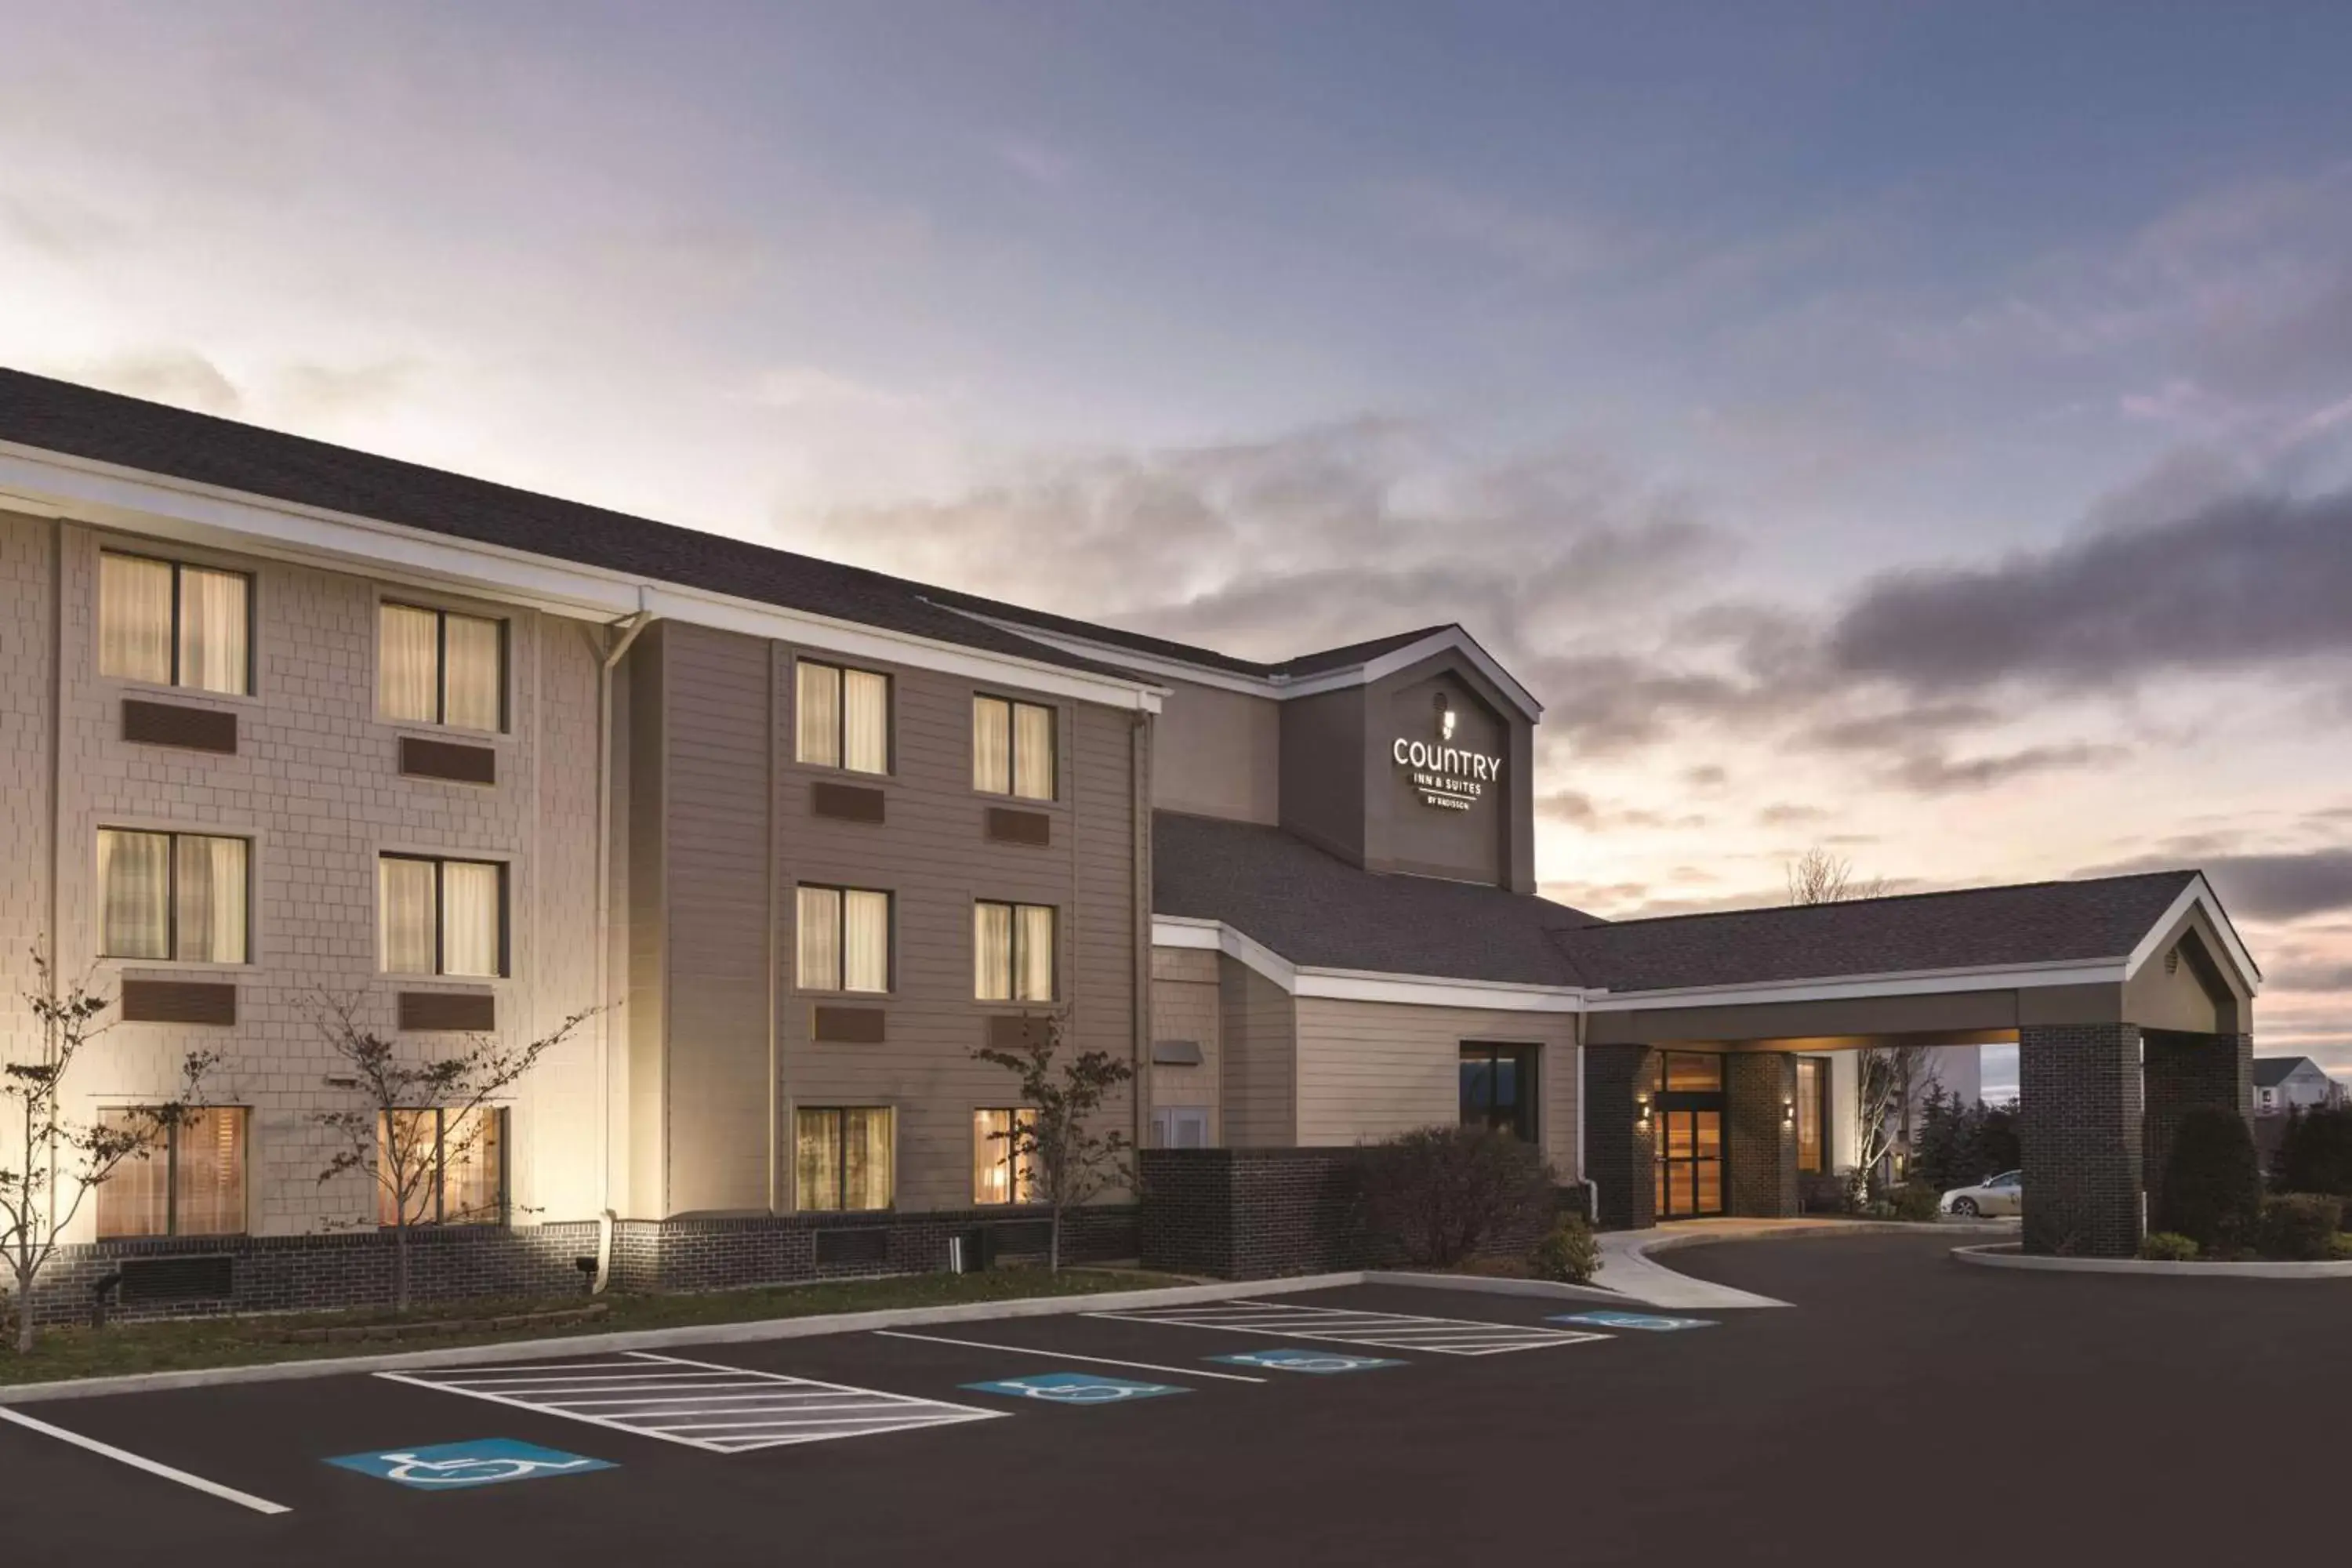 Property Building in Country Inn & Suites by Radisson, Erie, PA